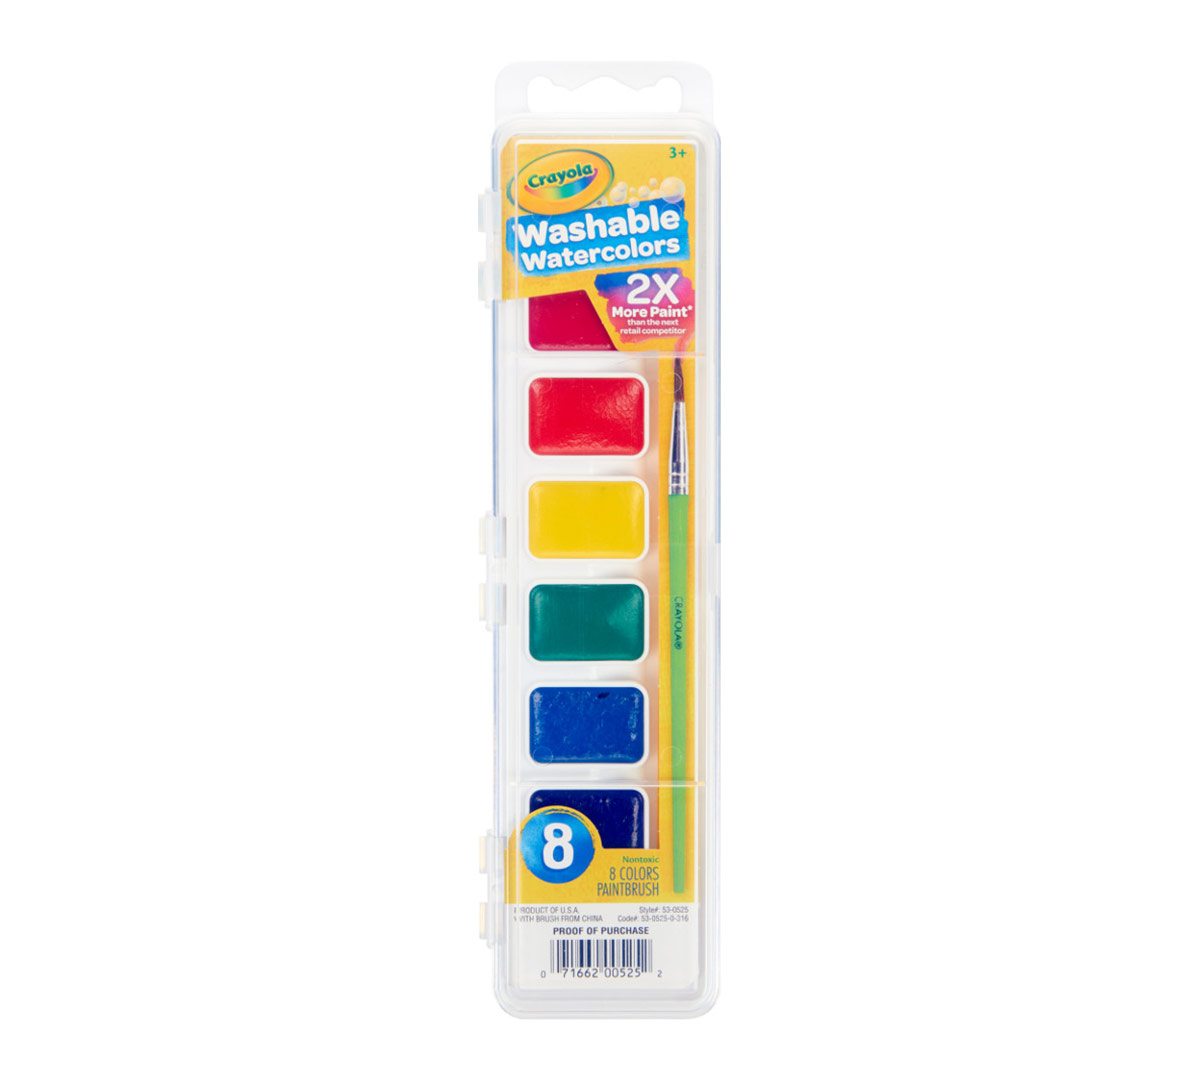 Download 8 Washable Watercolors, Paint Set For Kids | Crayola.com | Crayola